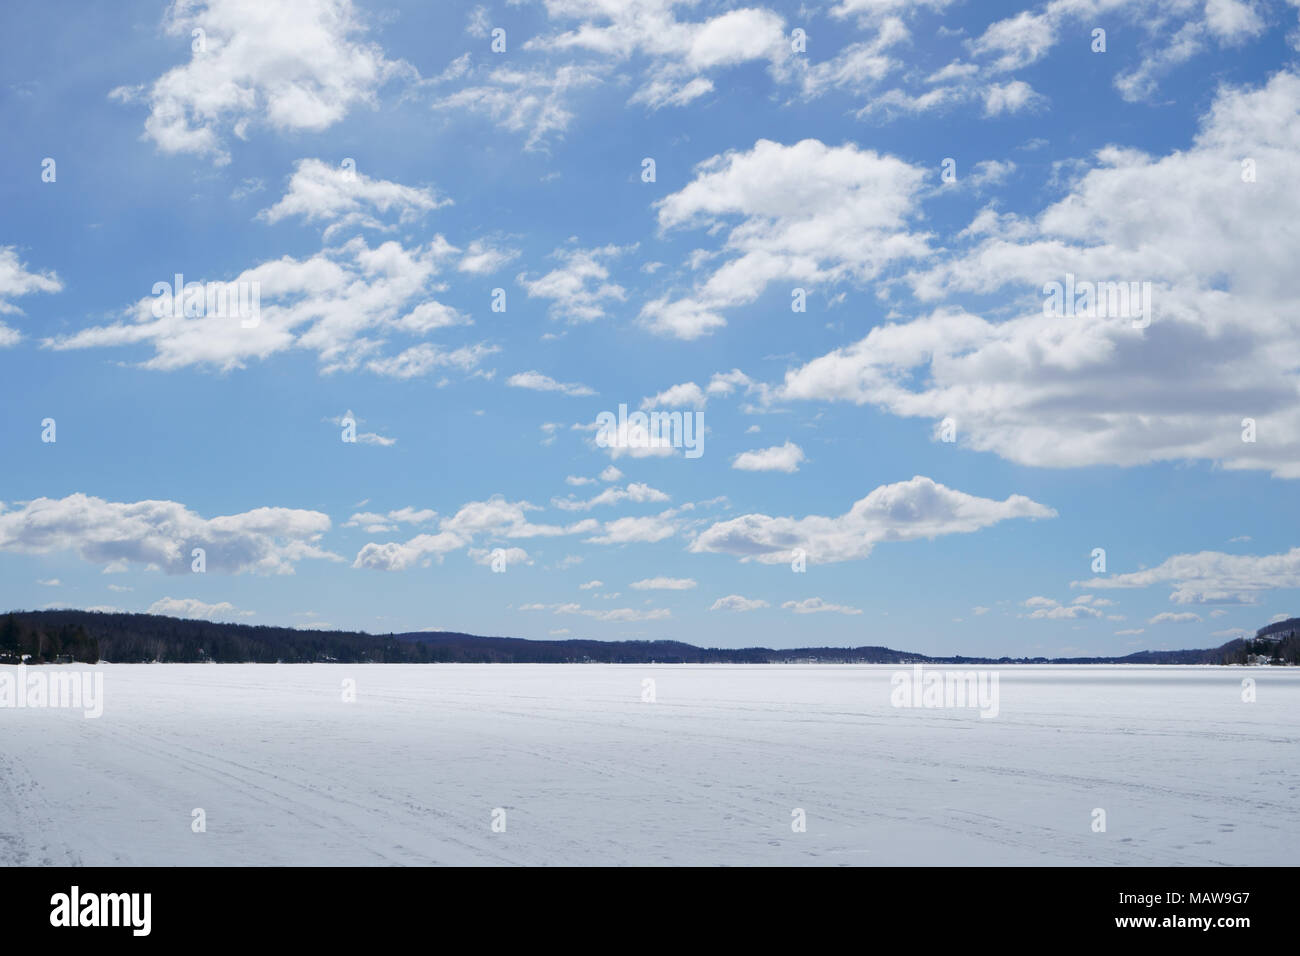 Large blue sky with white clouds on the lake at spring time during a beautiful day. Stock Photo